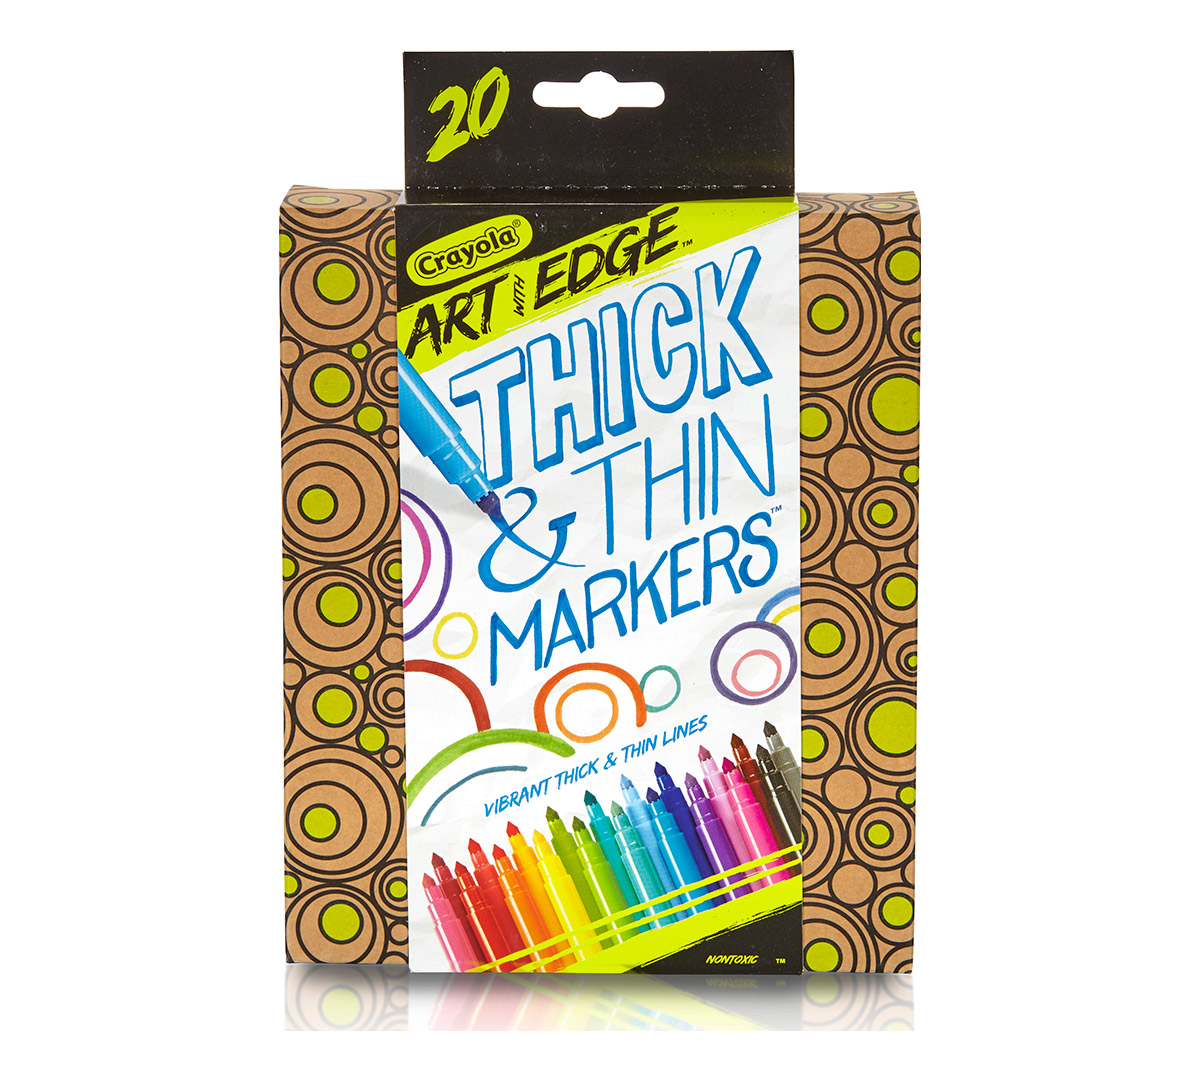 Download Crayola Art With Edge, Thick & Thin Markers, 20 count, Art Tools, Coloring for Everyone!, Great ...